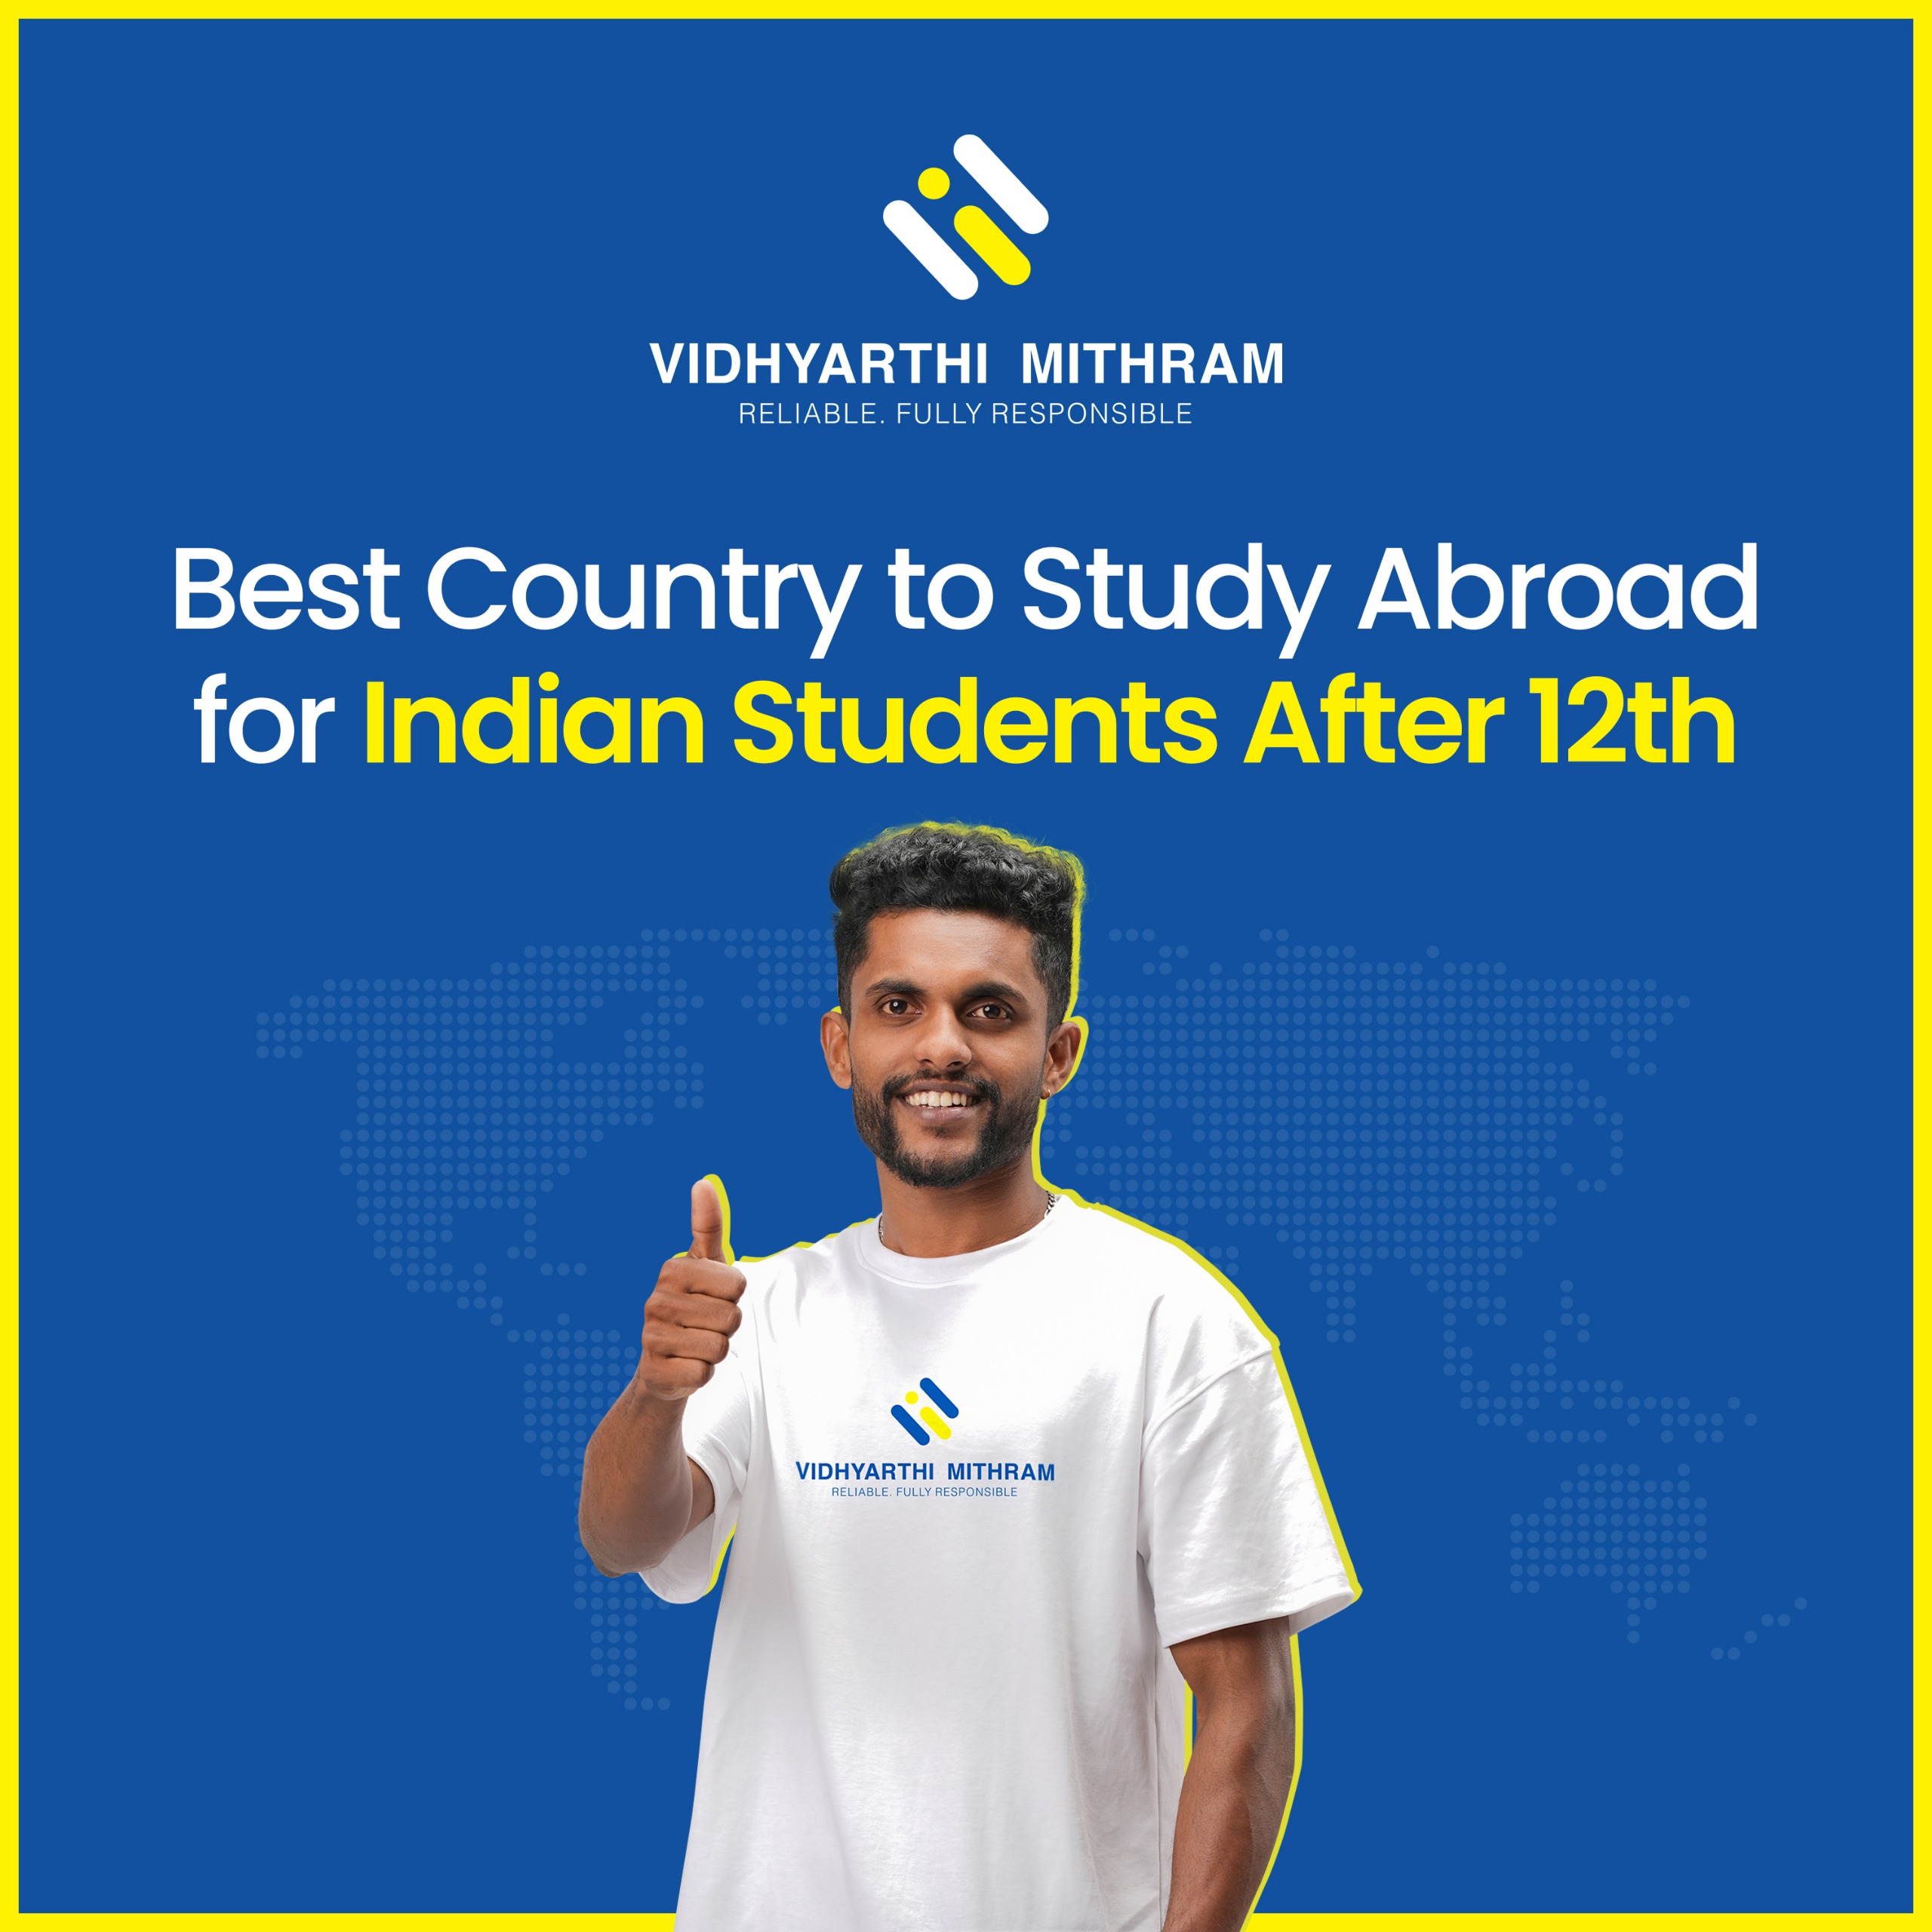 Best Country to Study Abroad for Indian Students After 12th